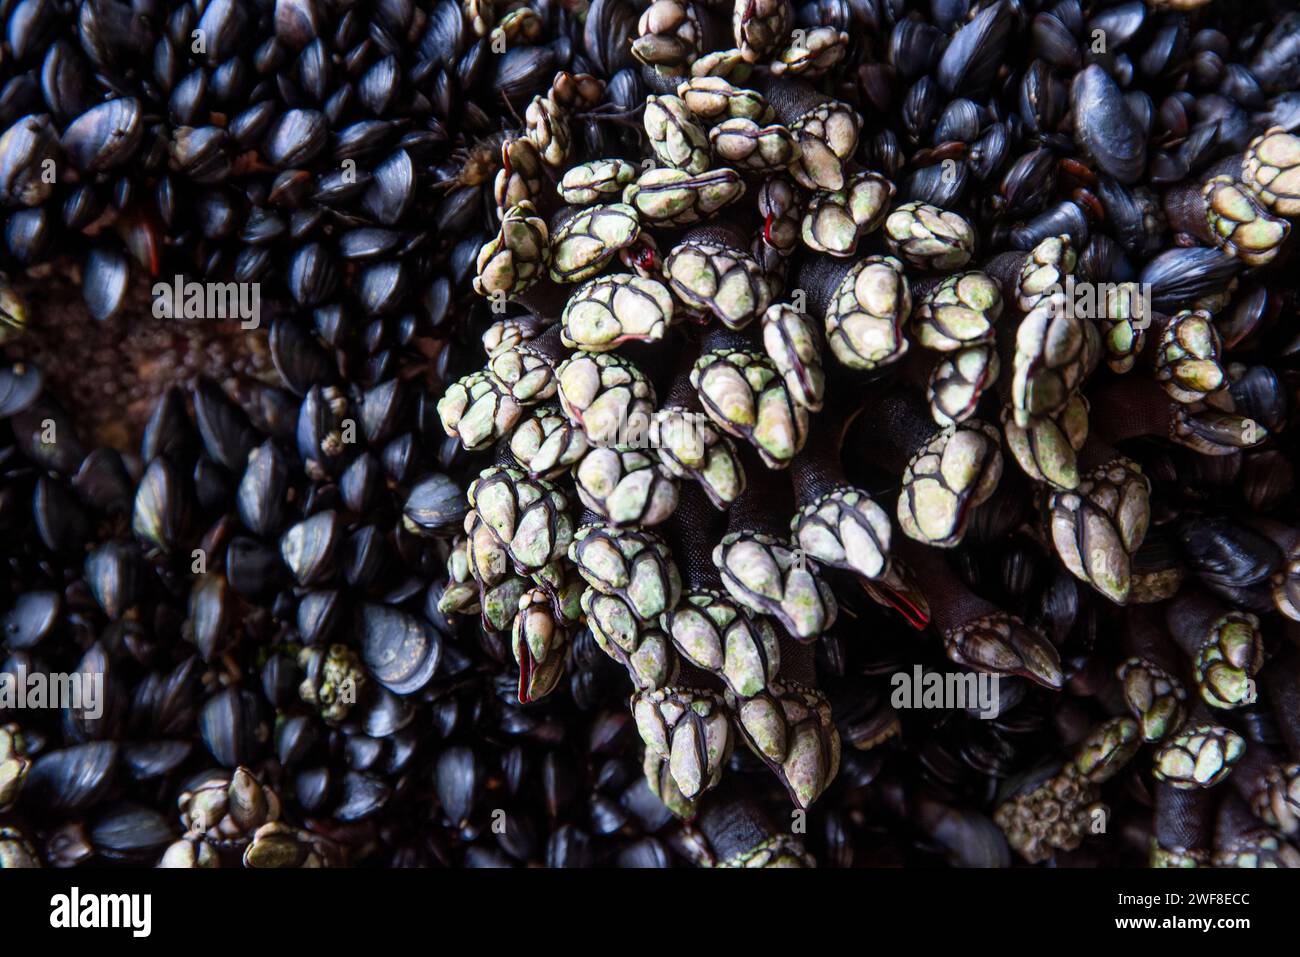 Seafood barnacle clinging to a rock over the ocean. Stock Photo